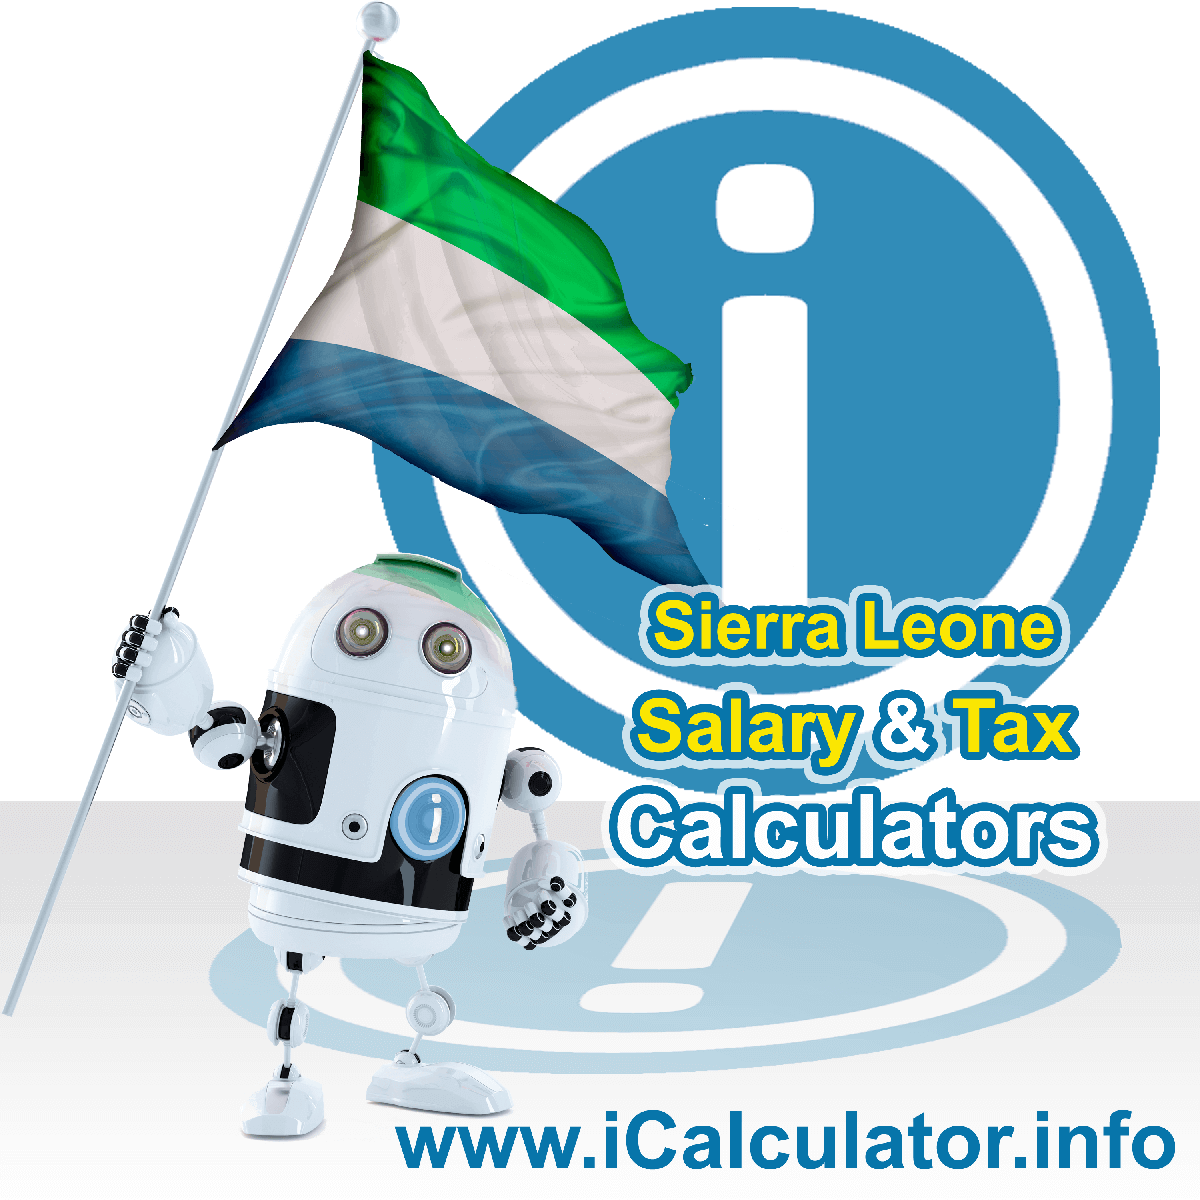 Sierra Leone Tax Calculator. This image shows the Sierra Leone flag and information relating to the tax formula for the Sierra Leone Salary Calculator